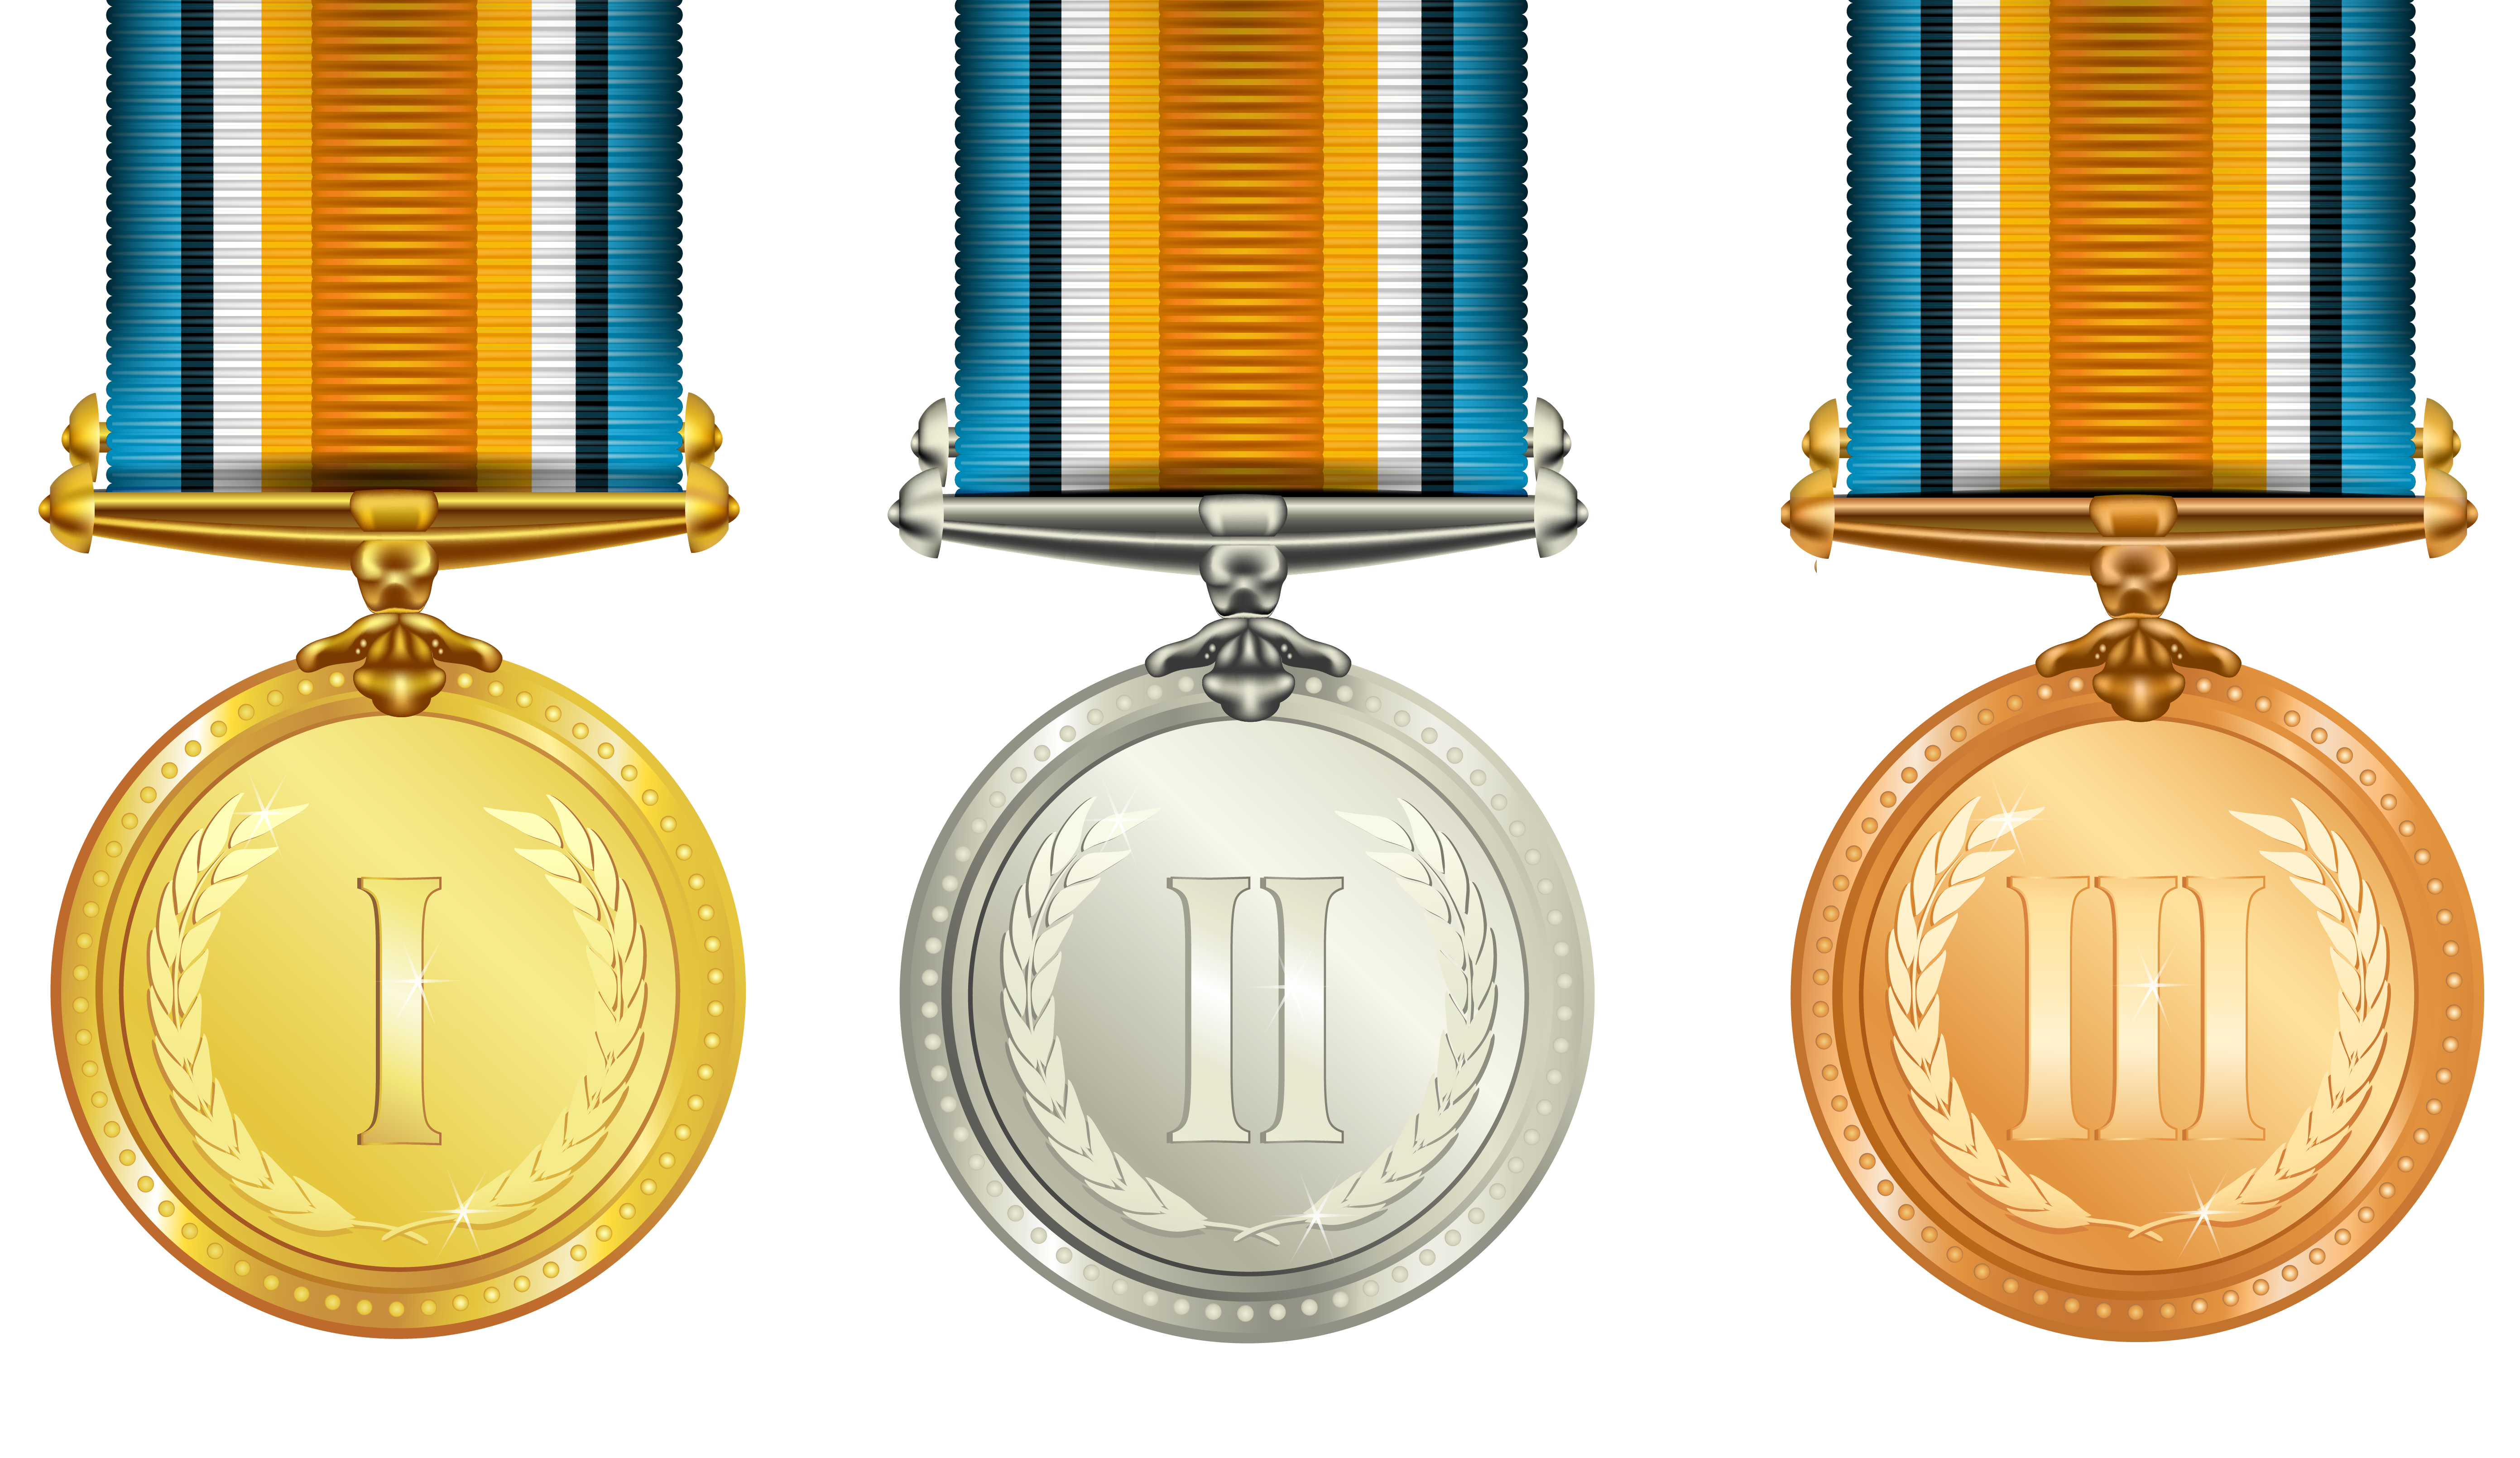 Picture #1631138 - medal clipart gold medalist. medal clipart gold medalist. 